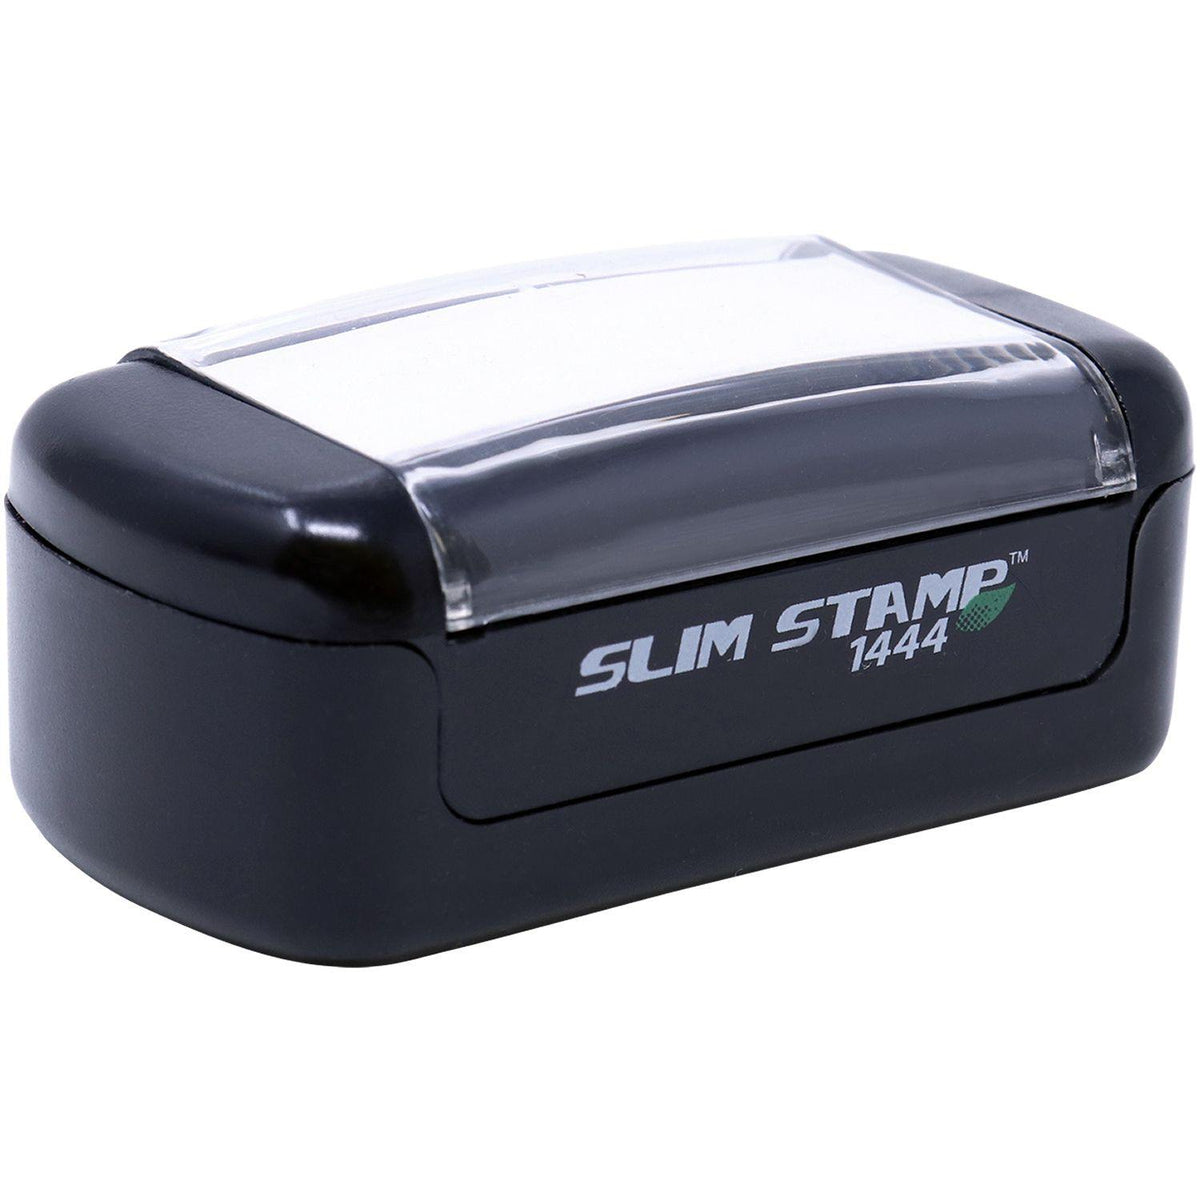 Alt View of Slim Pre Inked Due Date Stamp Mount Angle